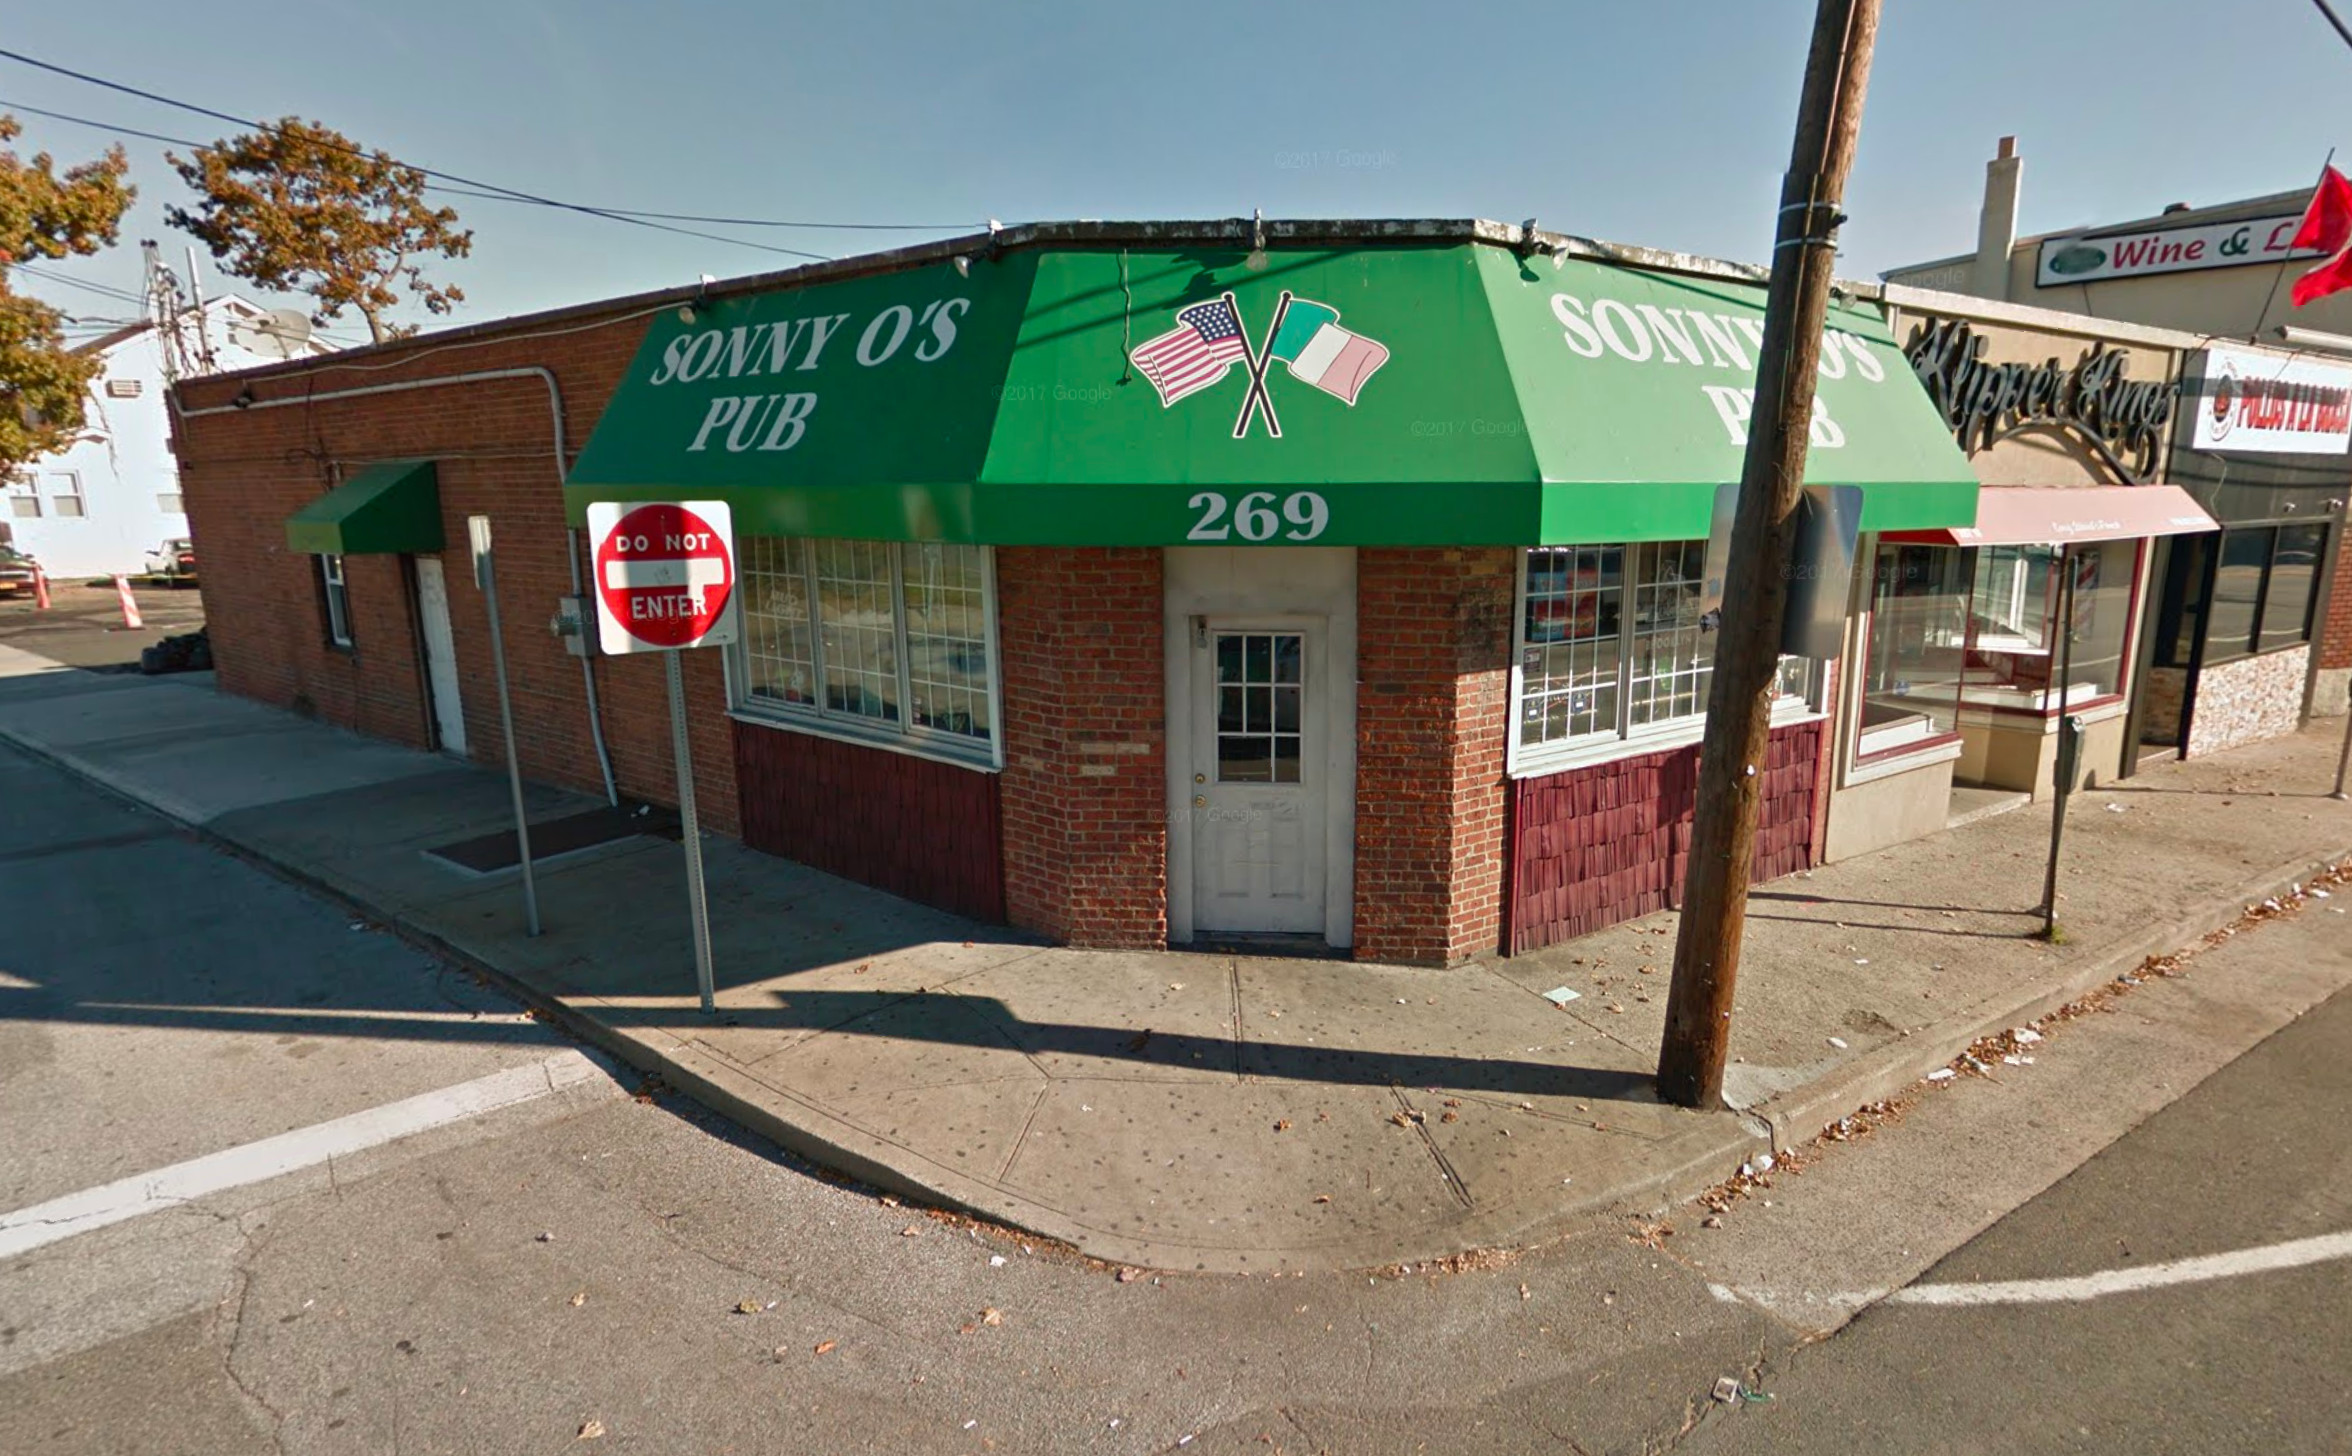 The man was found outside Sonny O's Pub, at 269 West Merrick Road, early Monday morning.